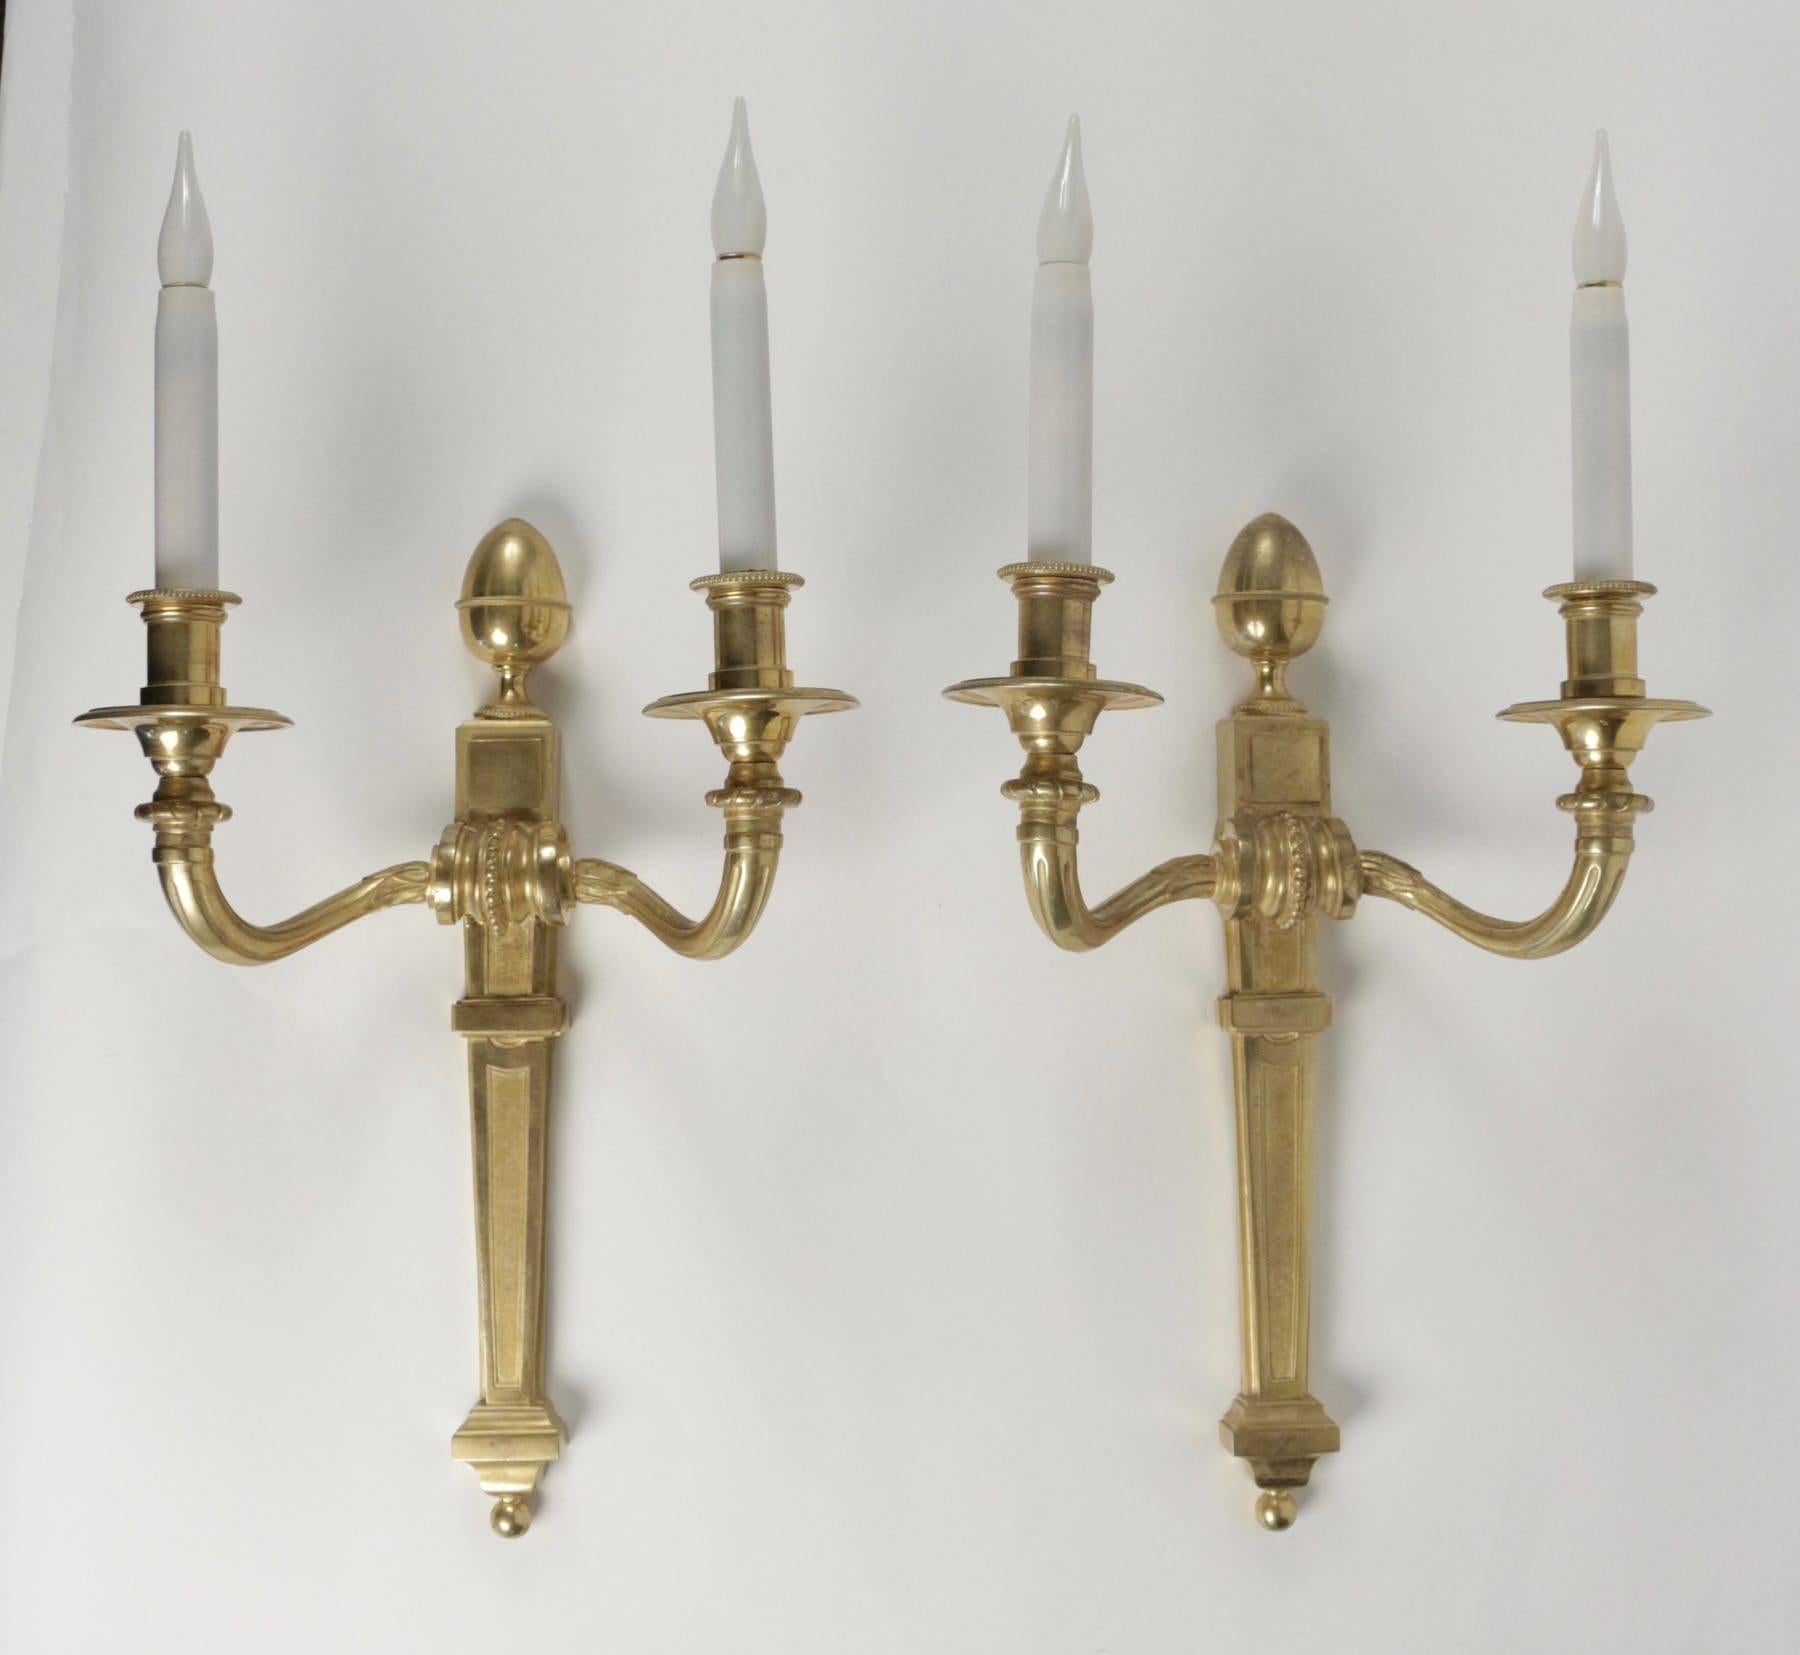 Late 19th Century Pair of Bronze Dore Sconces in the Style of Louis XV from the 19th Century